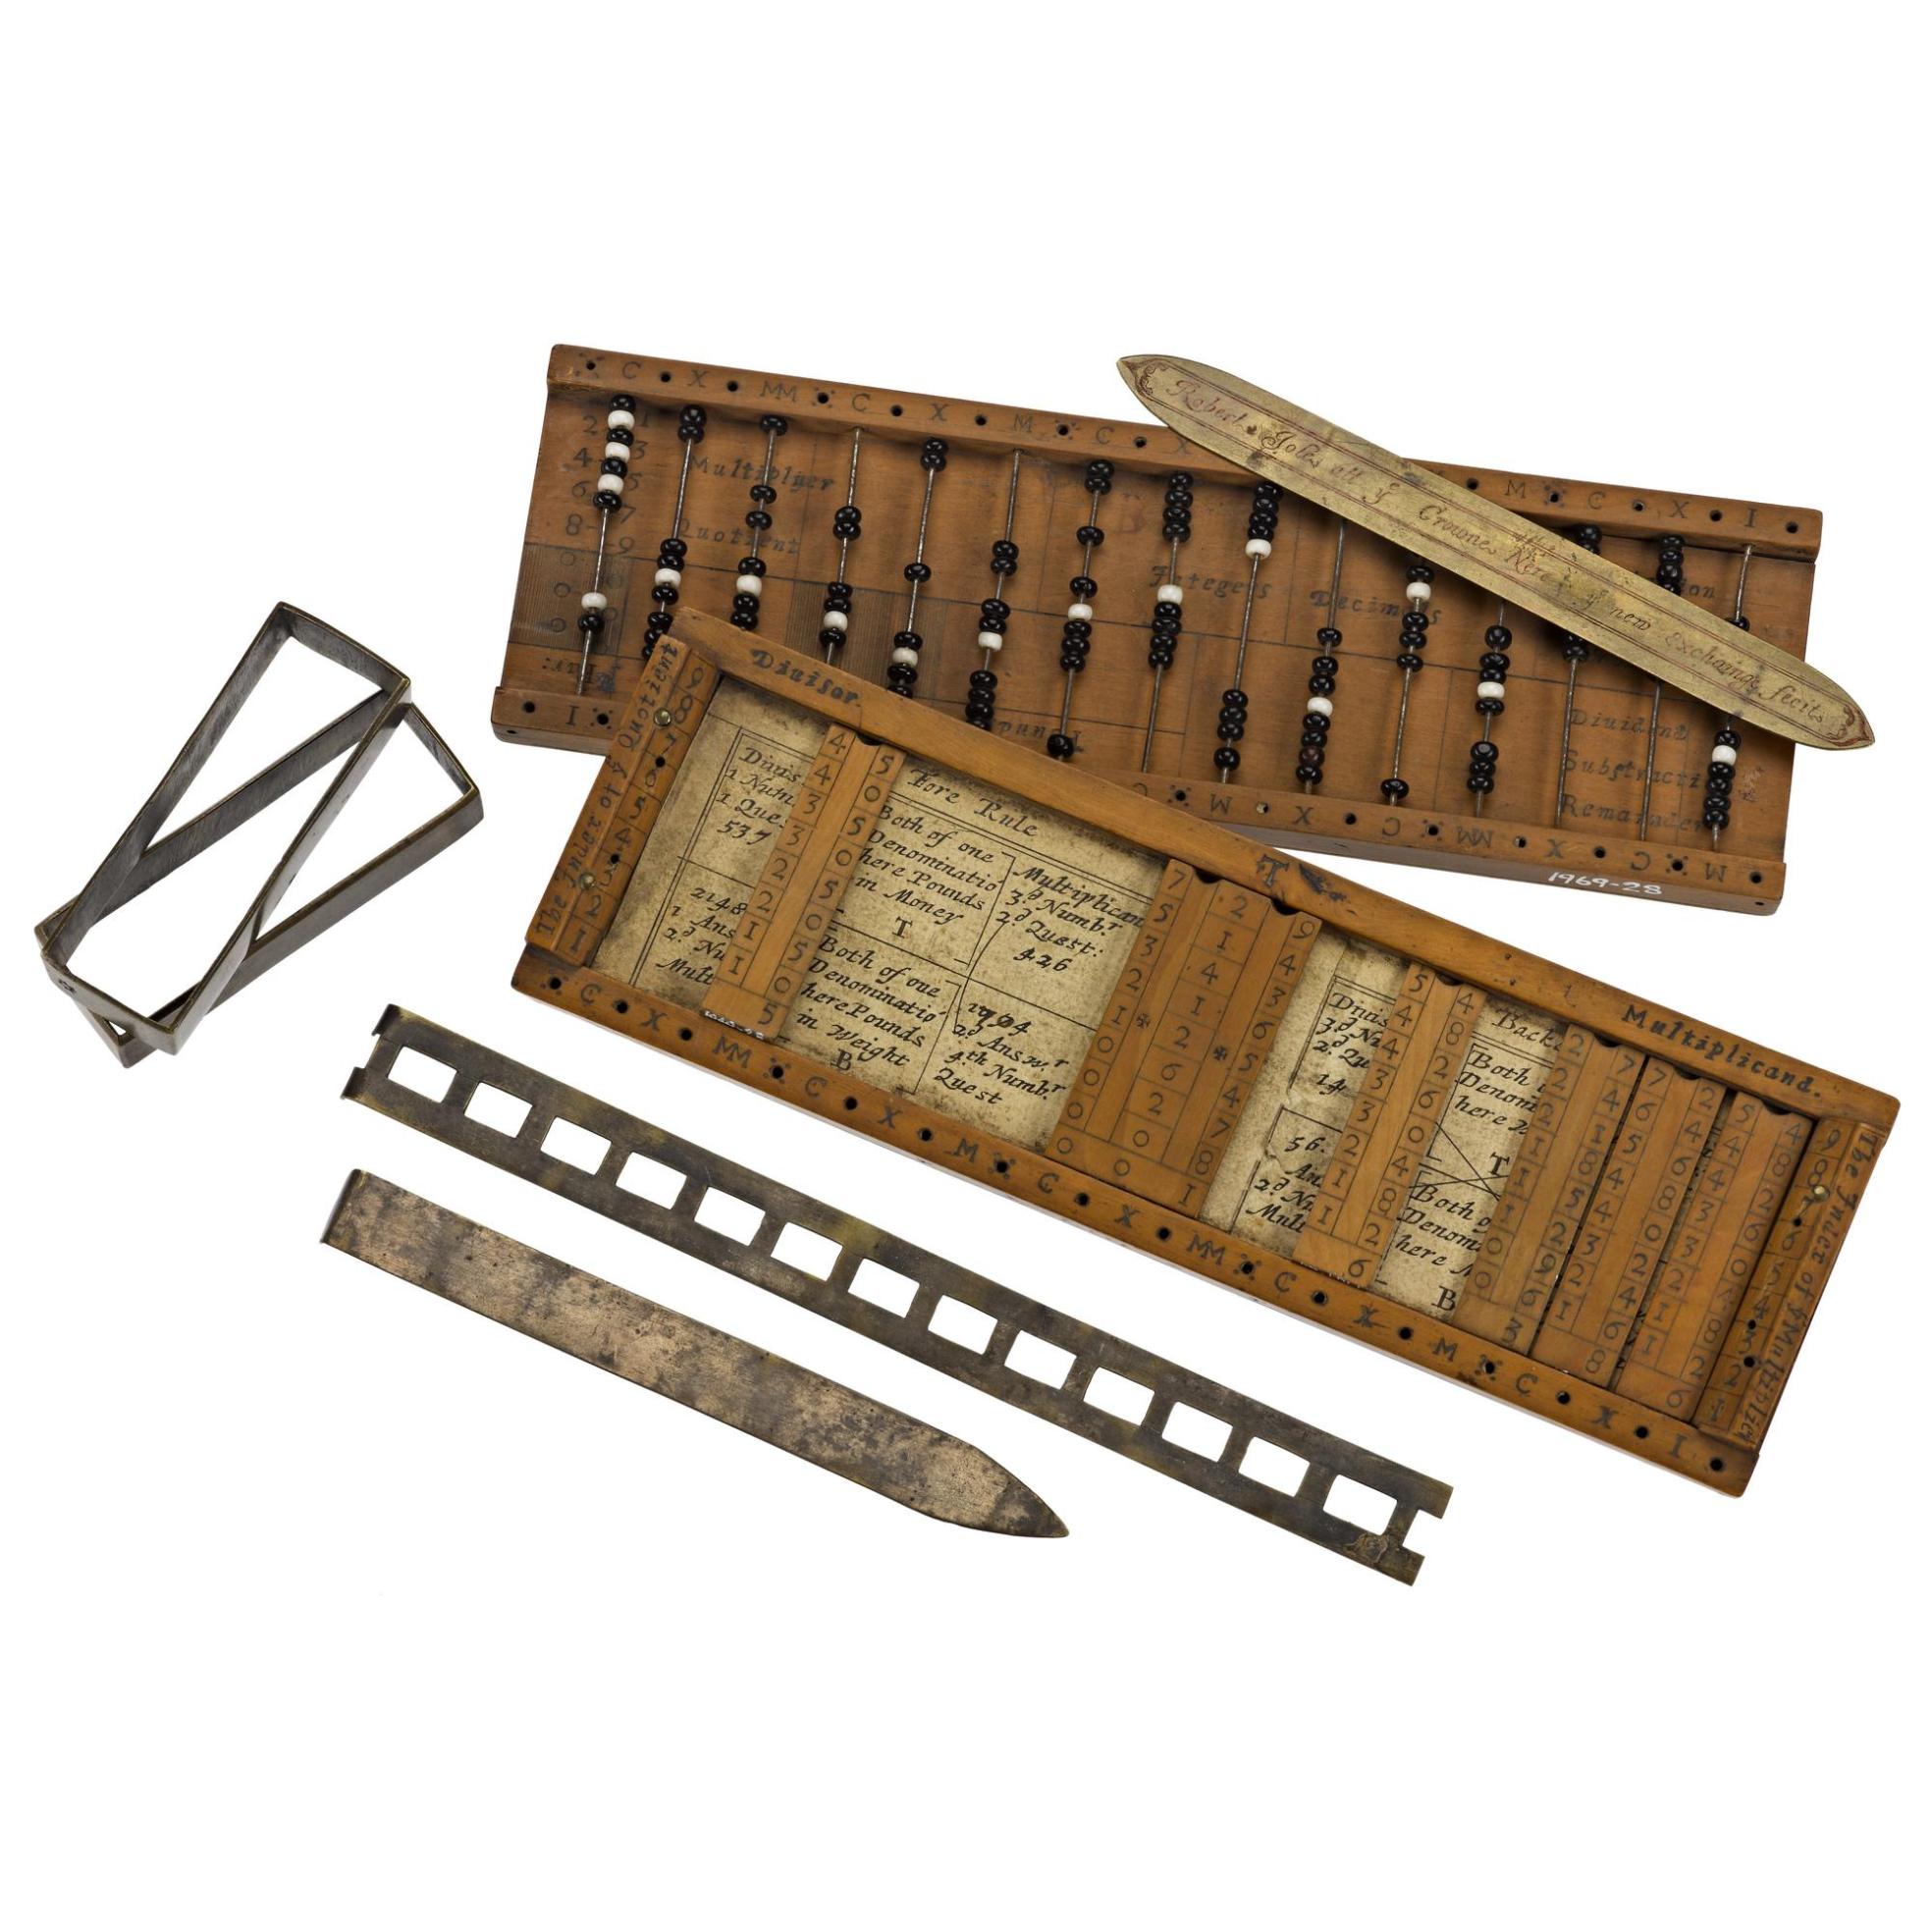 Arithmetical compendium, combining strip form Napier's Bones and bead-type abacus, in boxwood case, by Robert Jole of London, c. 1670.